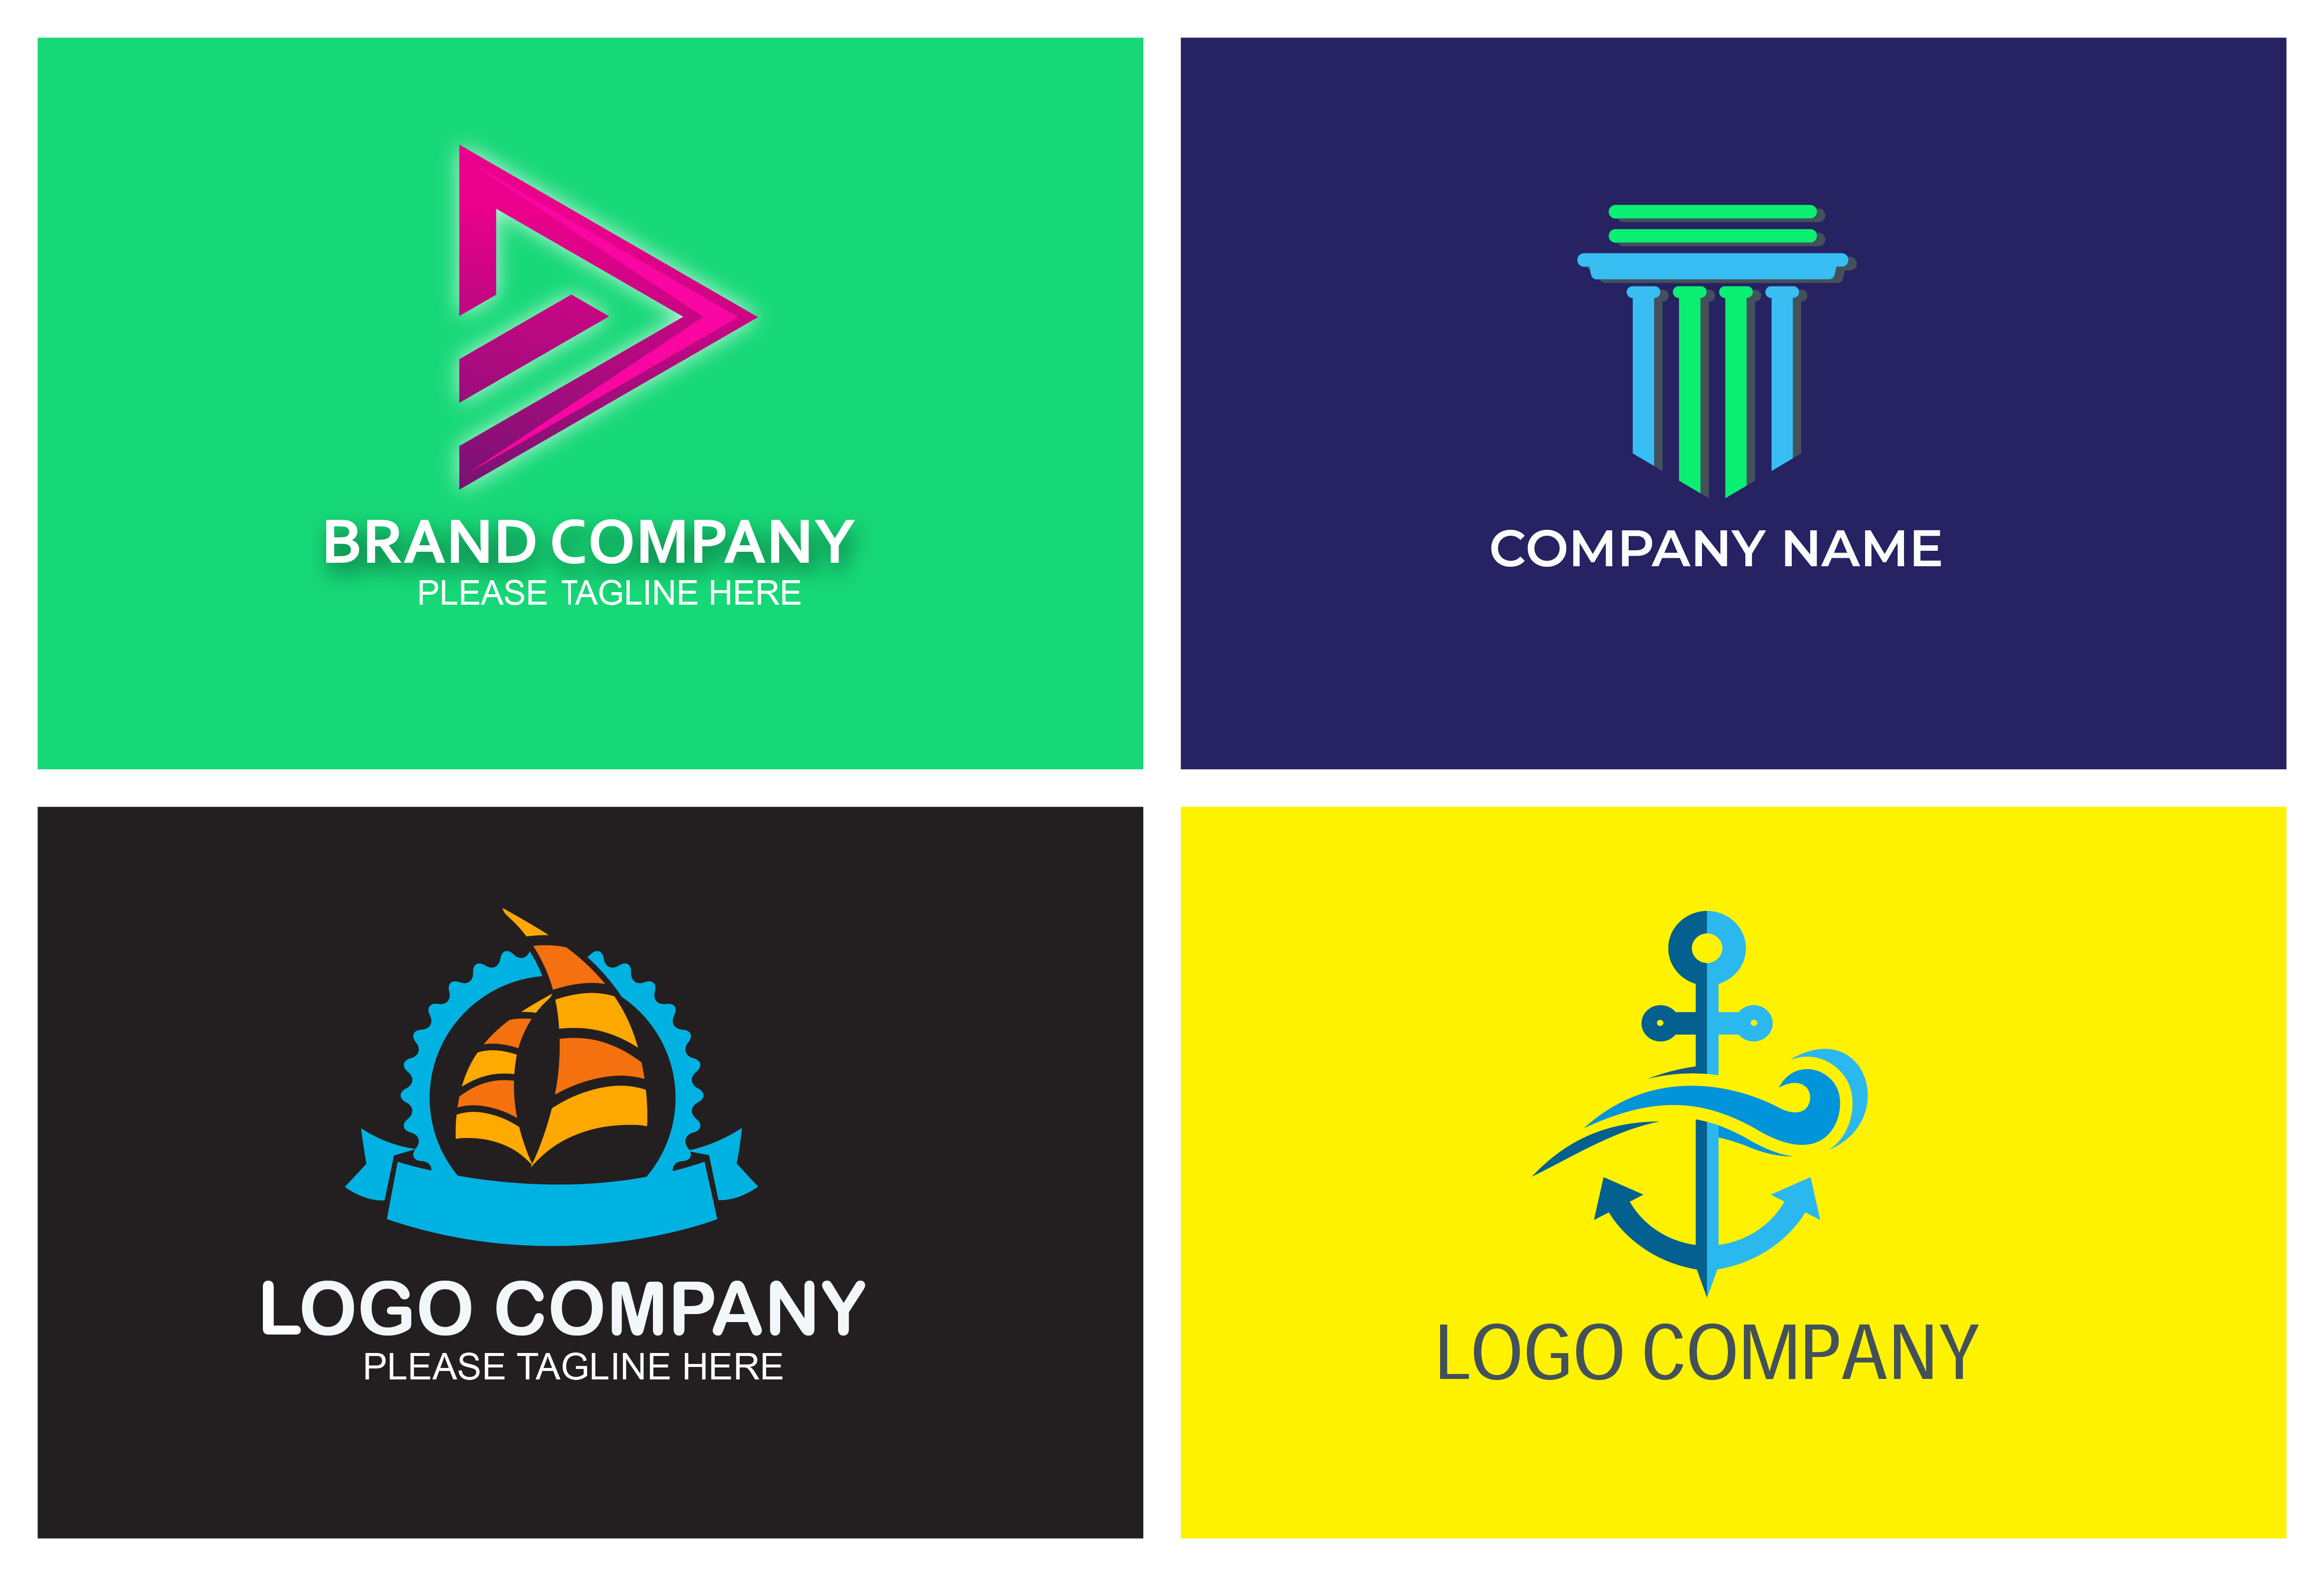 I will design a modern and minimal logo in less than 24 hours